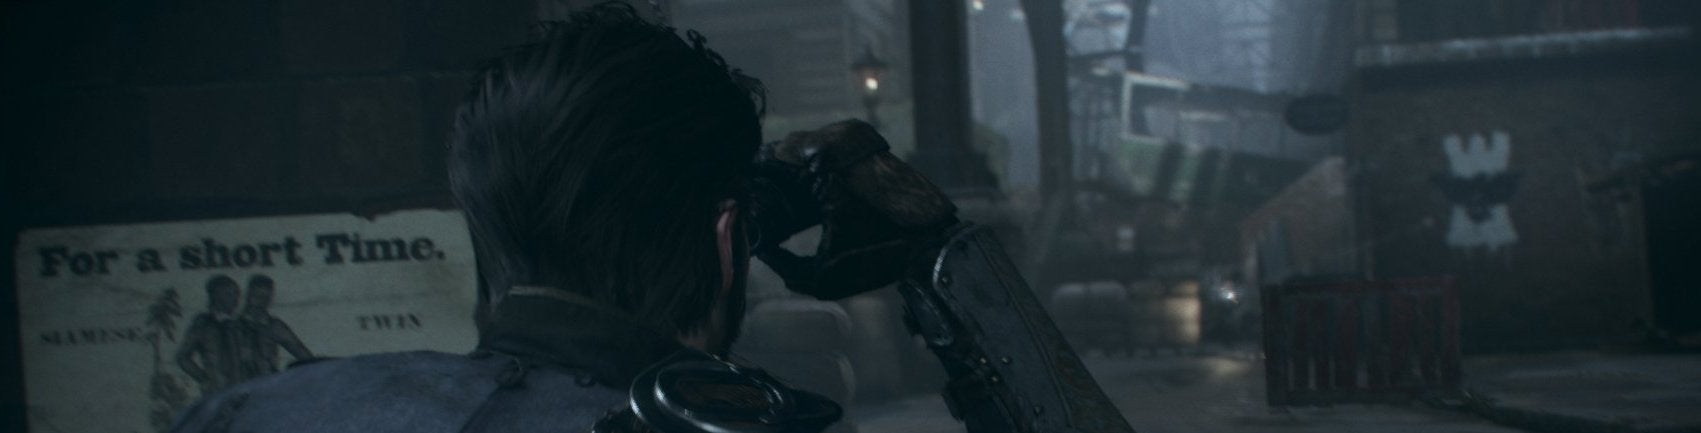 Image for Video: The Order 1886 - debating the issue of value